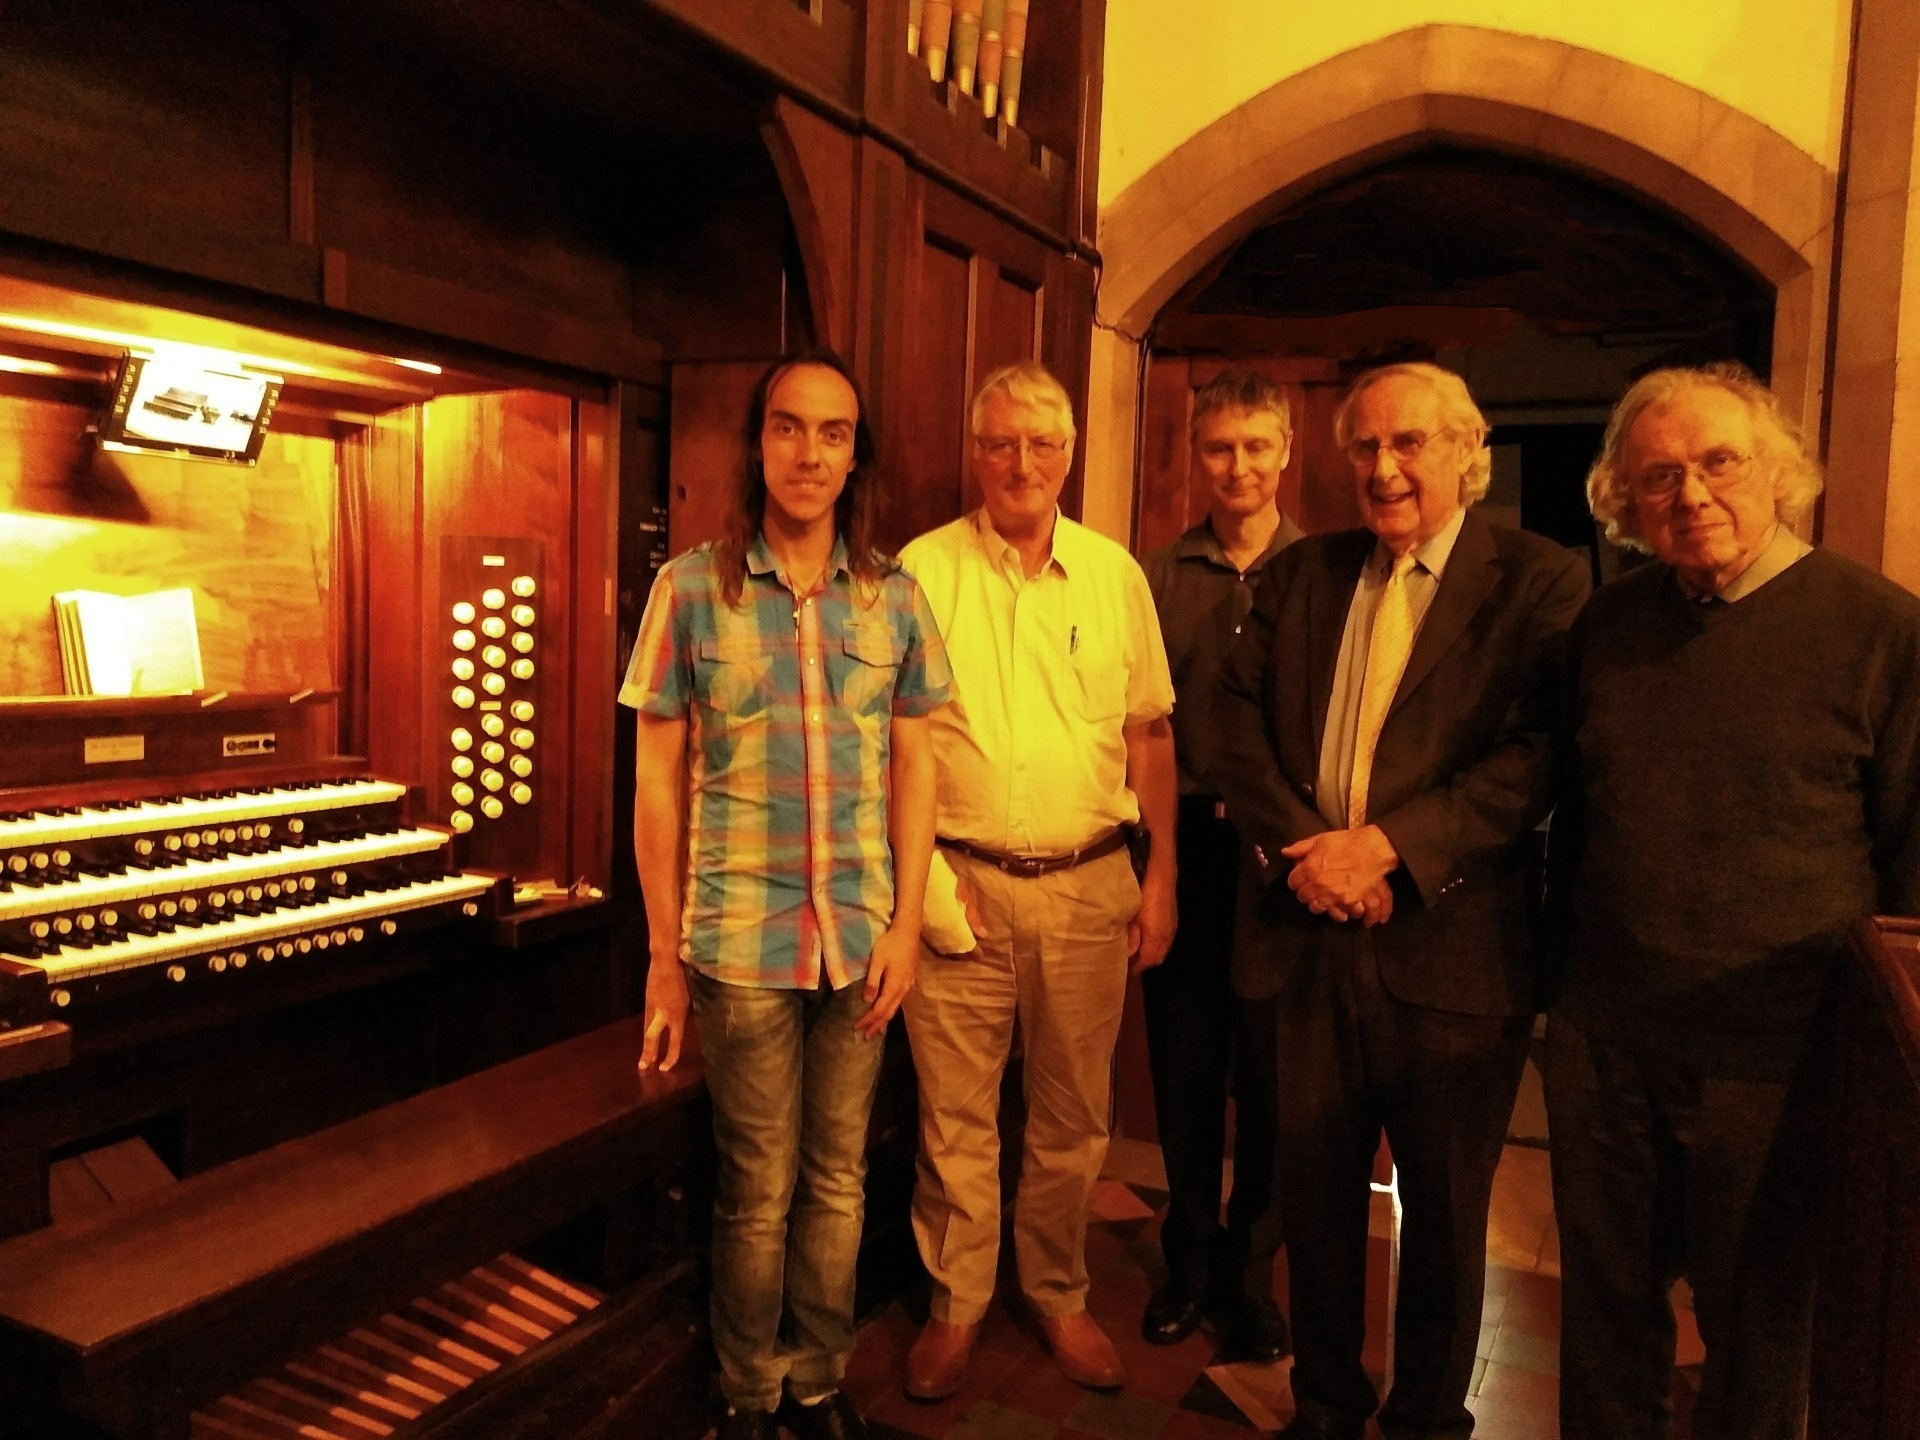 Image: recitalists by the console